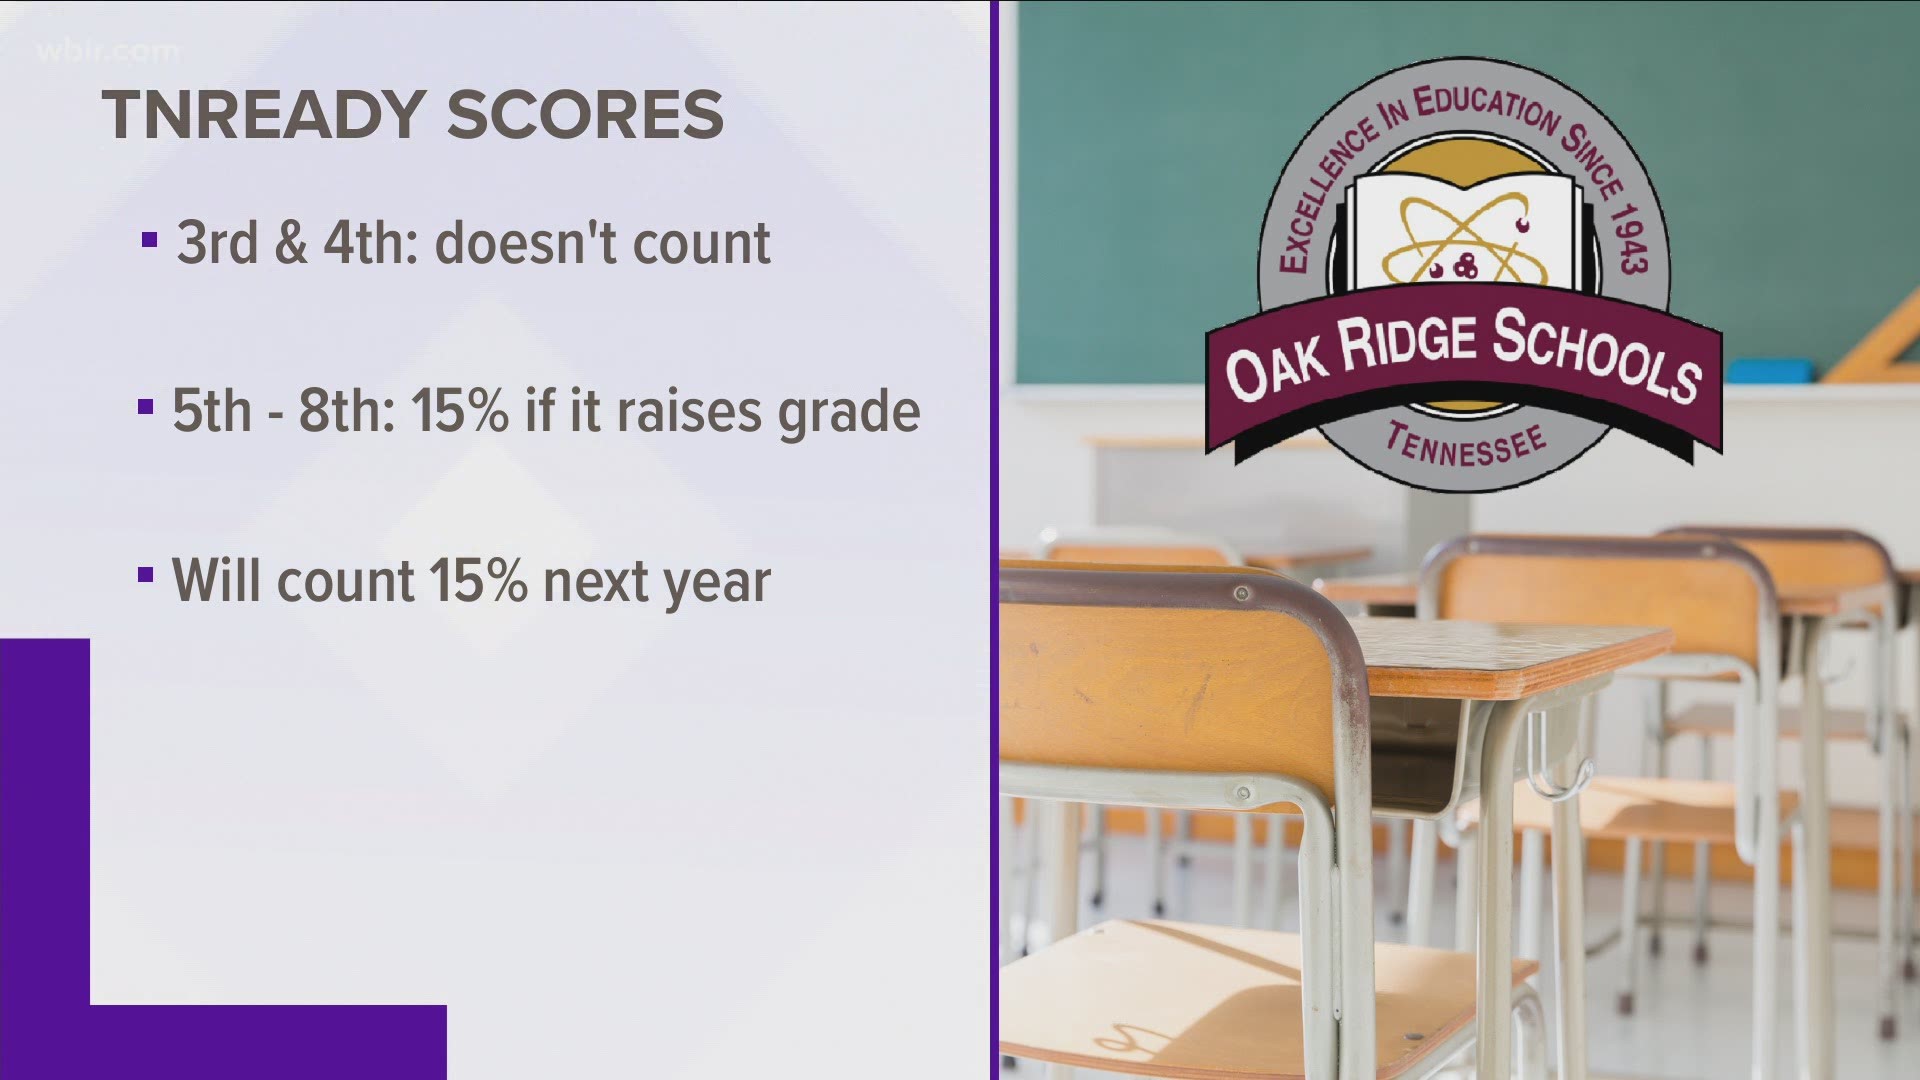 Officials said that standardized tests will only be counted if it helps Oak Ridge students' grades.